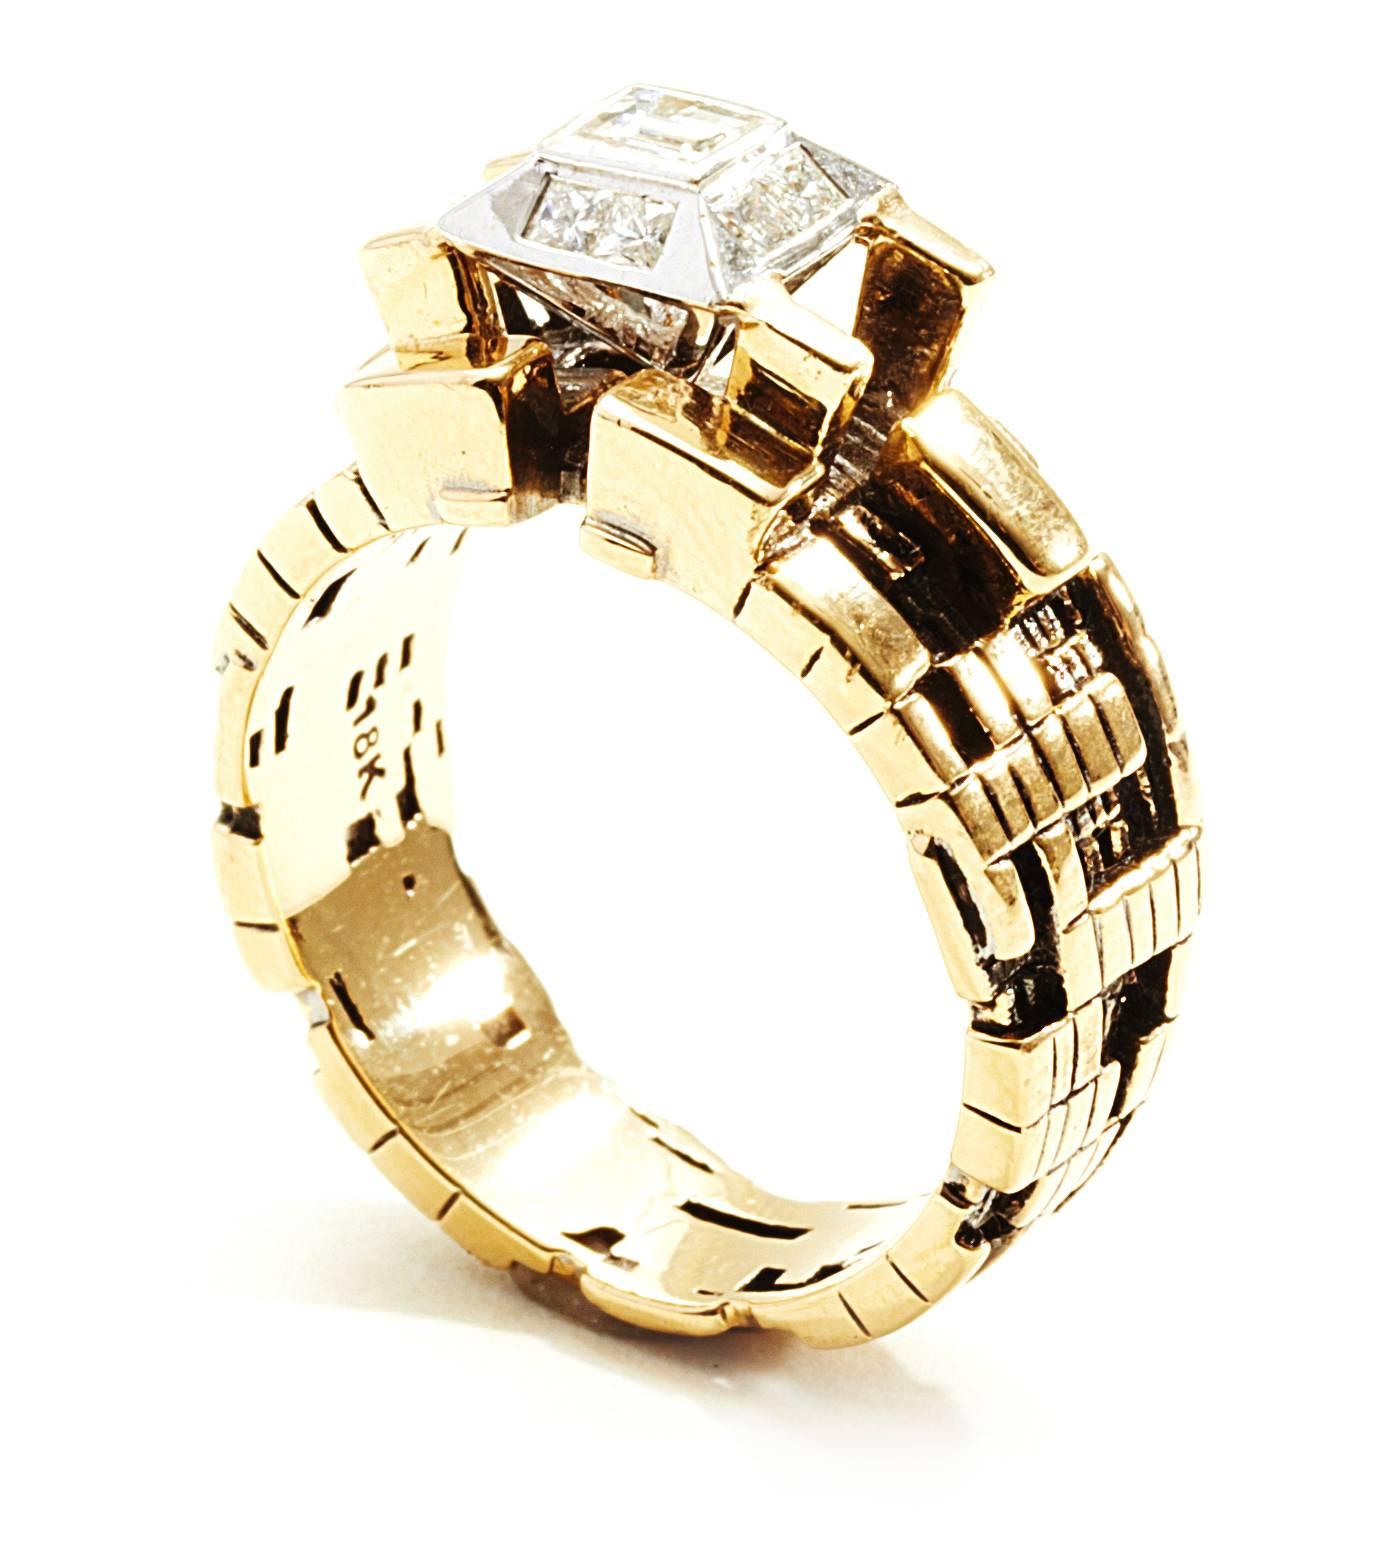 This piece by John Brevard was inspired by the bitcoin blockchain using a parametric modeling tool. Featuring 18K yellow gold with 9 round white diamonds at 2 mm each and 1 center baguette diamond at 3.5 mm, this is the perfect ring for the